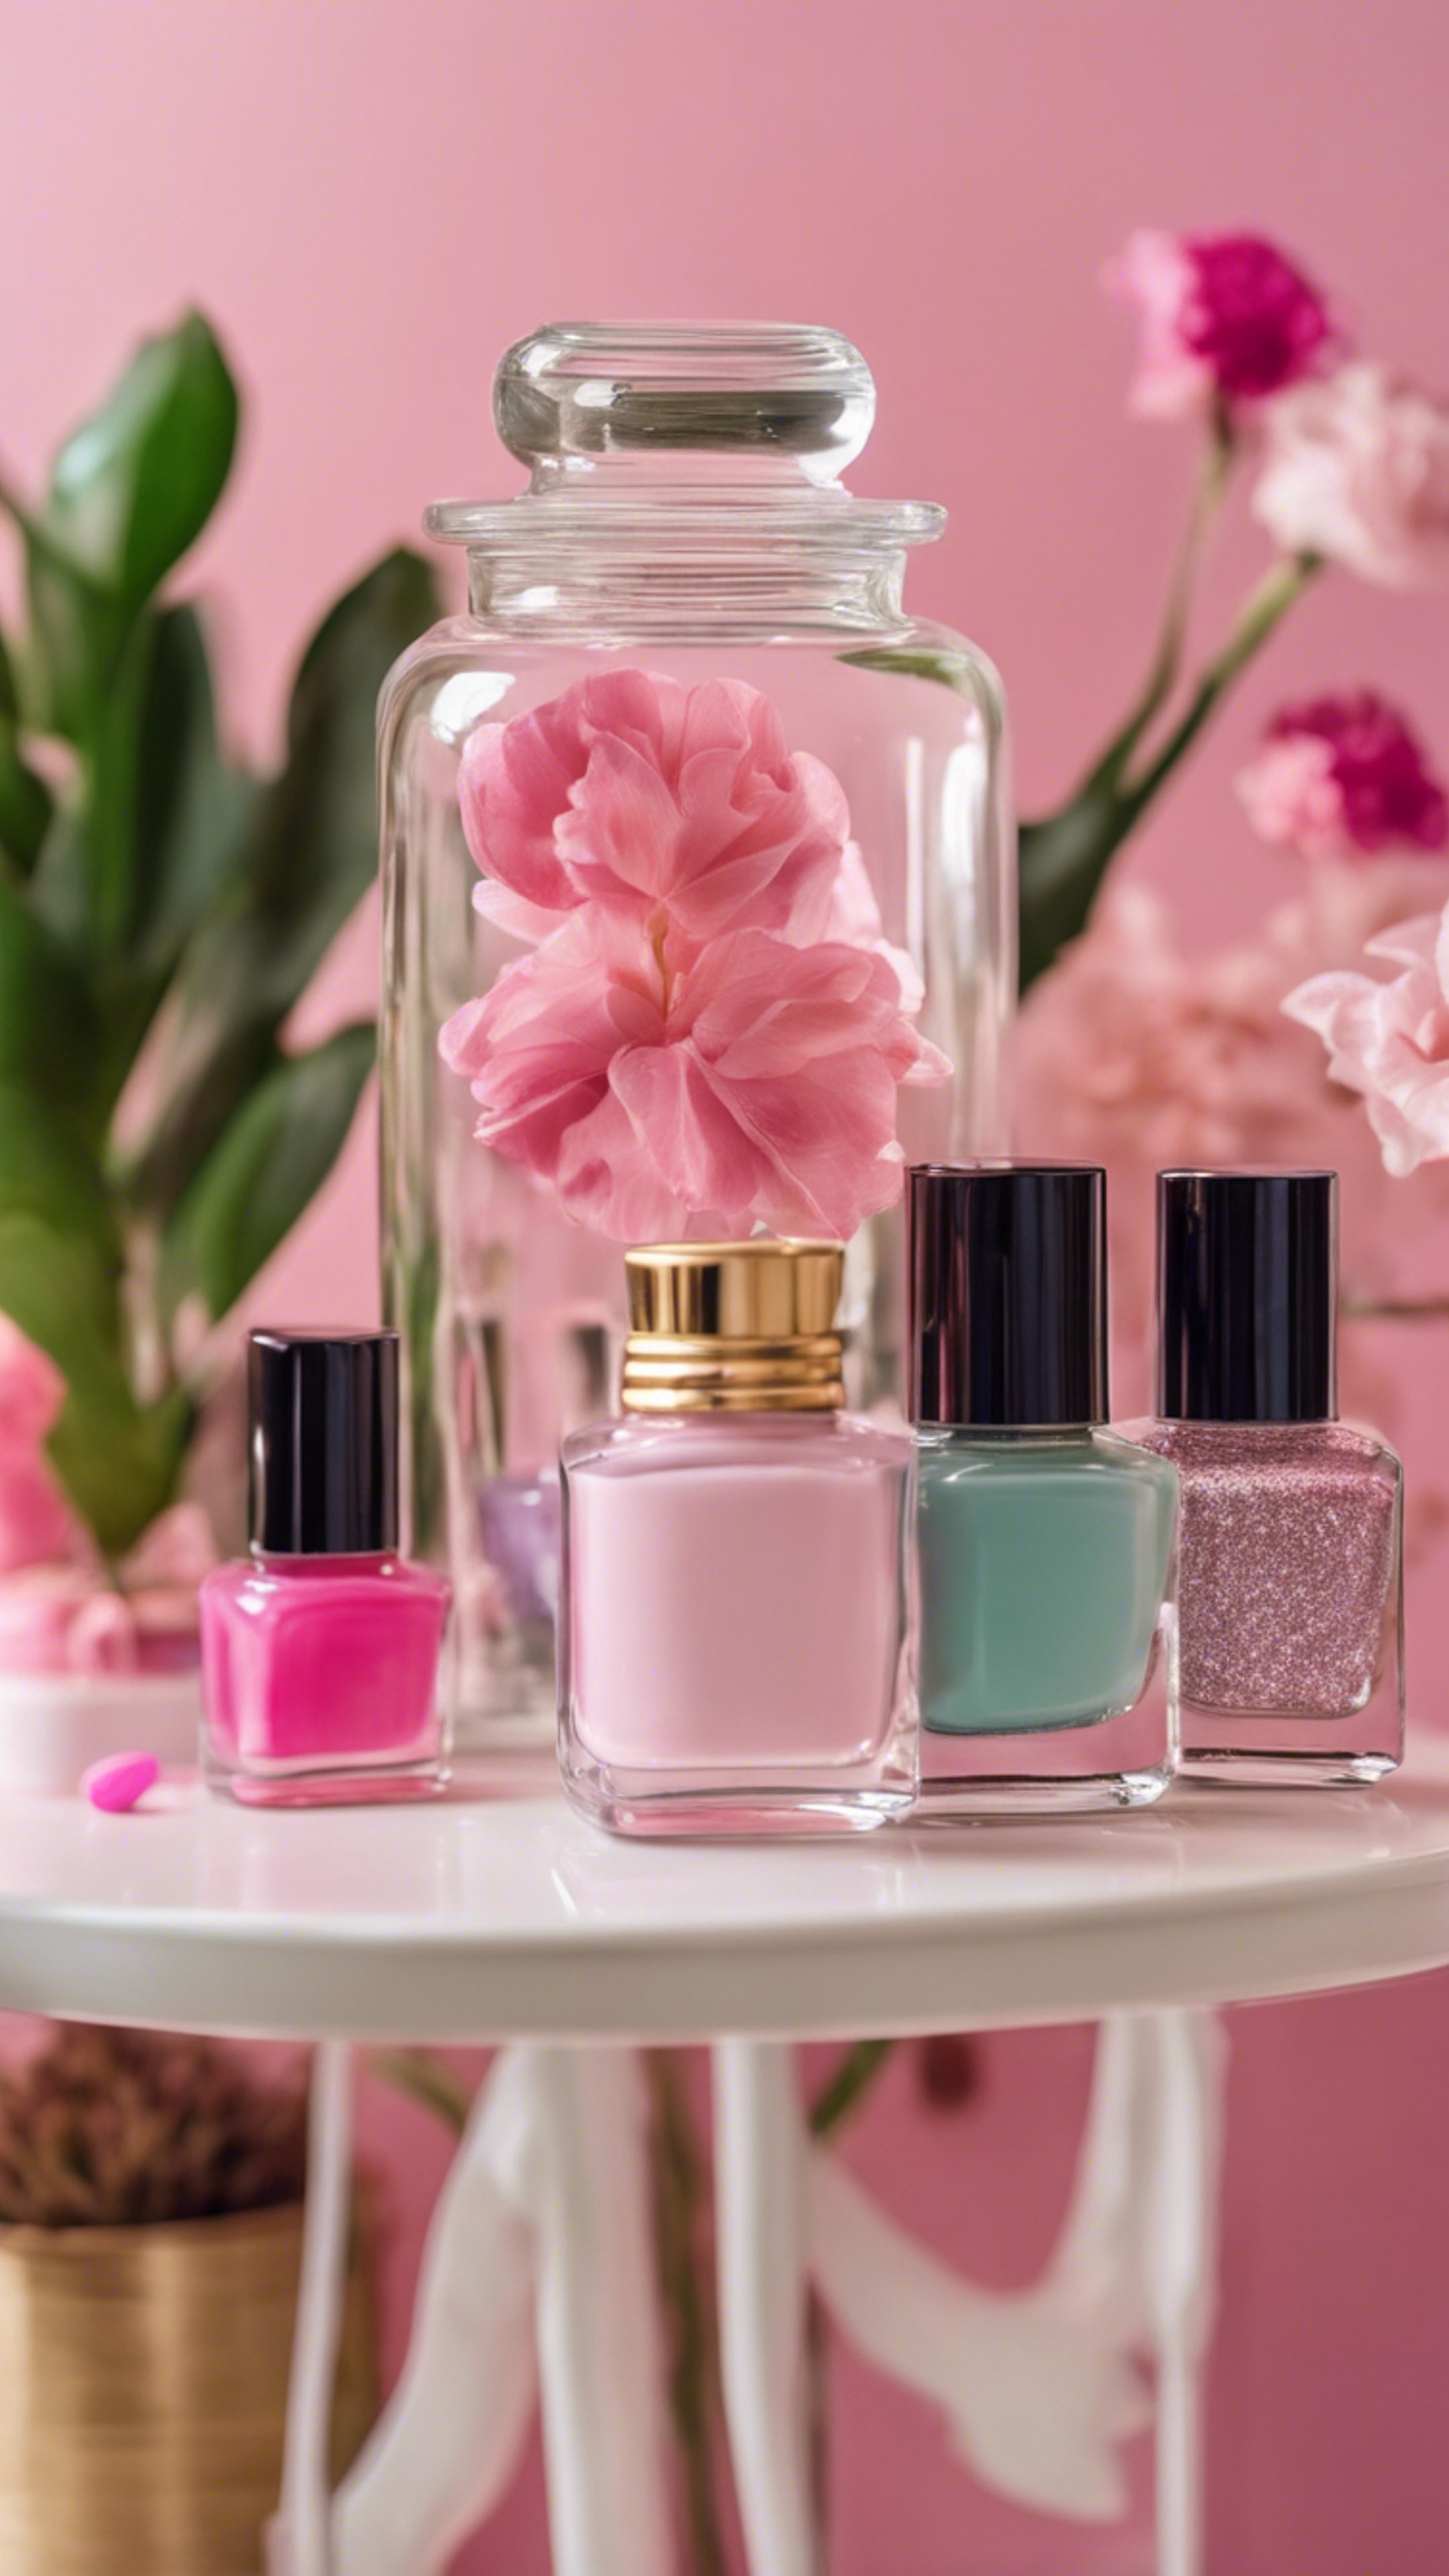 A glass jar full of colorful girly nail polishes on a pink dressing table with a chic plant in the background. Tapet[6e6d72fe0d8e4450902a]